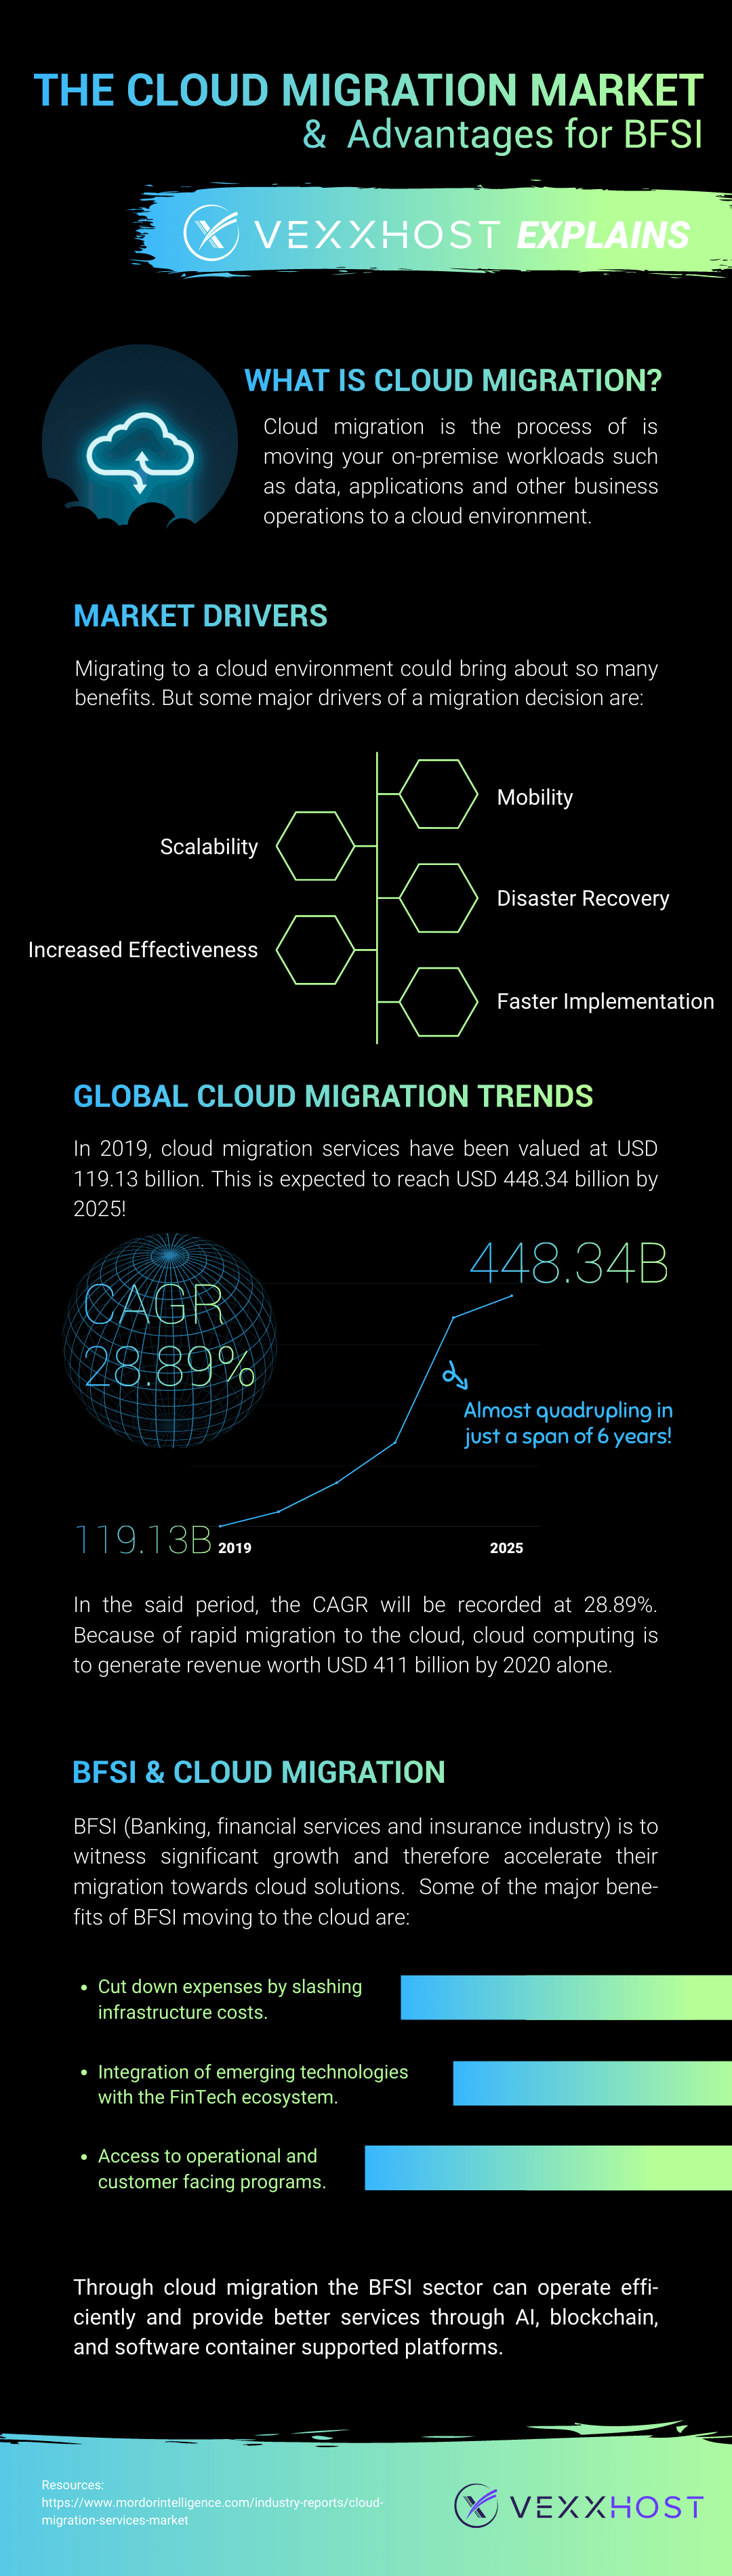 Cloud Migration and BFSI